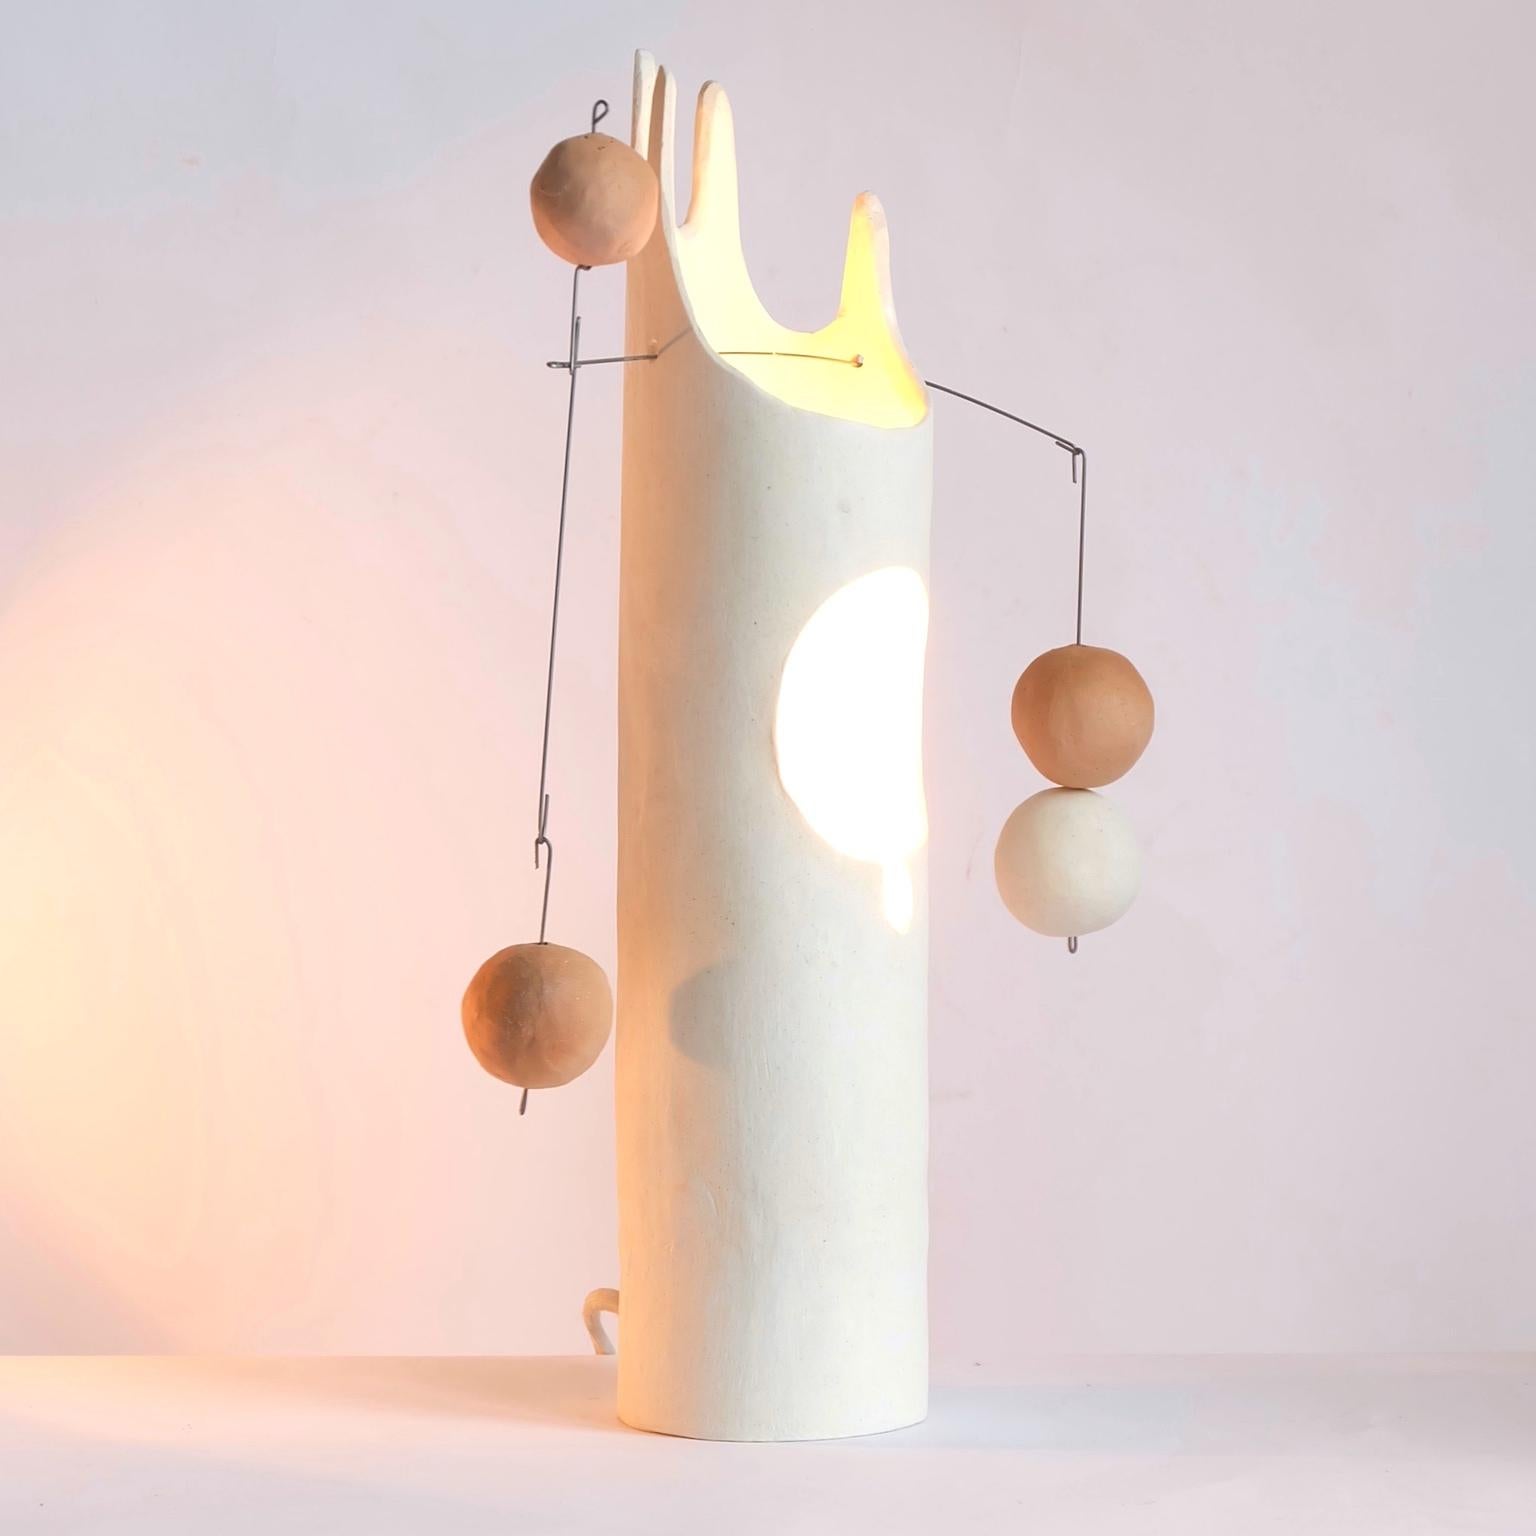 Mico’s Cousin Rico is a contemporary hand-built sculptural ceramic table lamp that inspires the joy of working with hands through unpacking, assembling and balancing weights. The handmade ceramic globes and the hanging steel wire come fit right